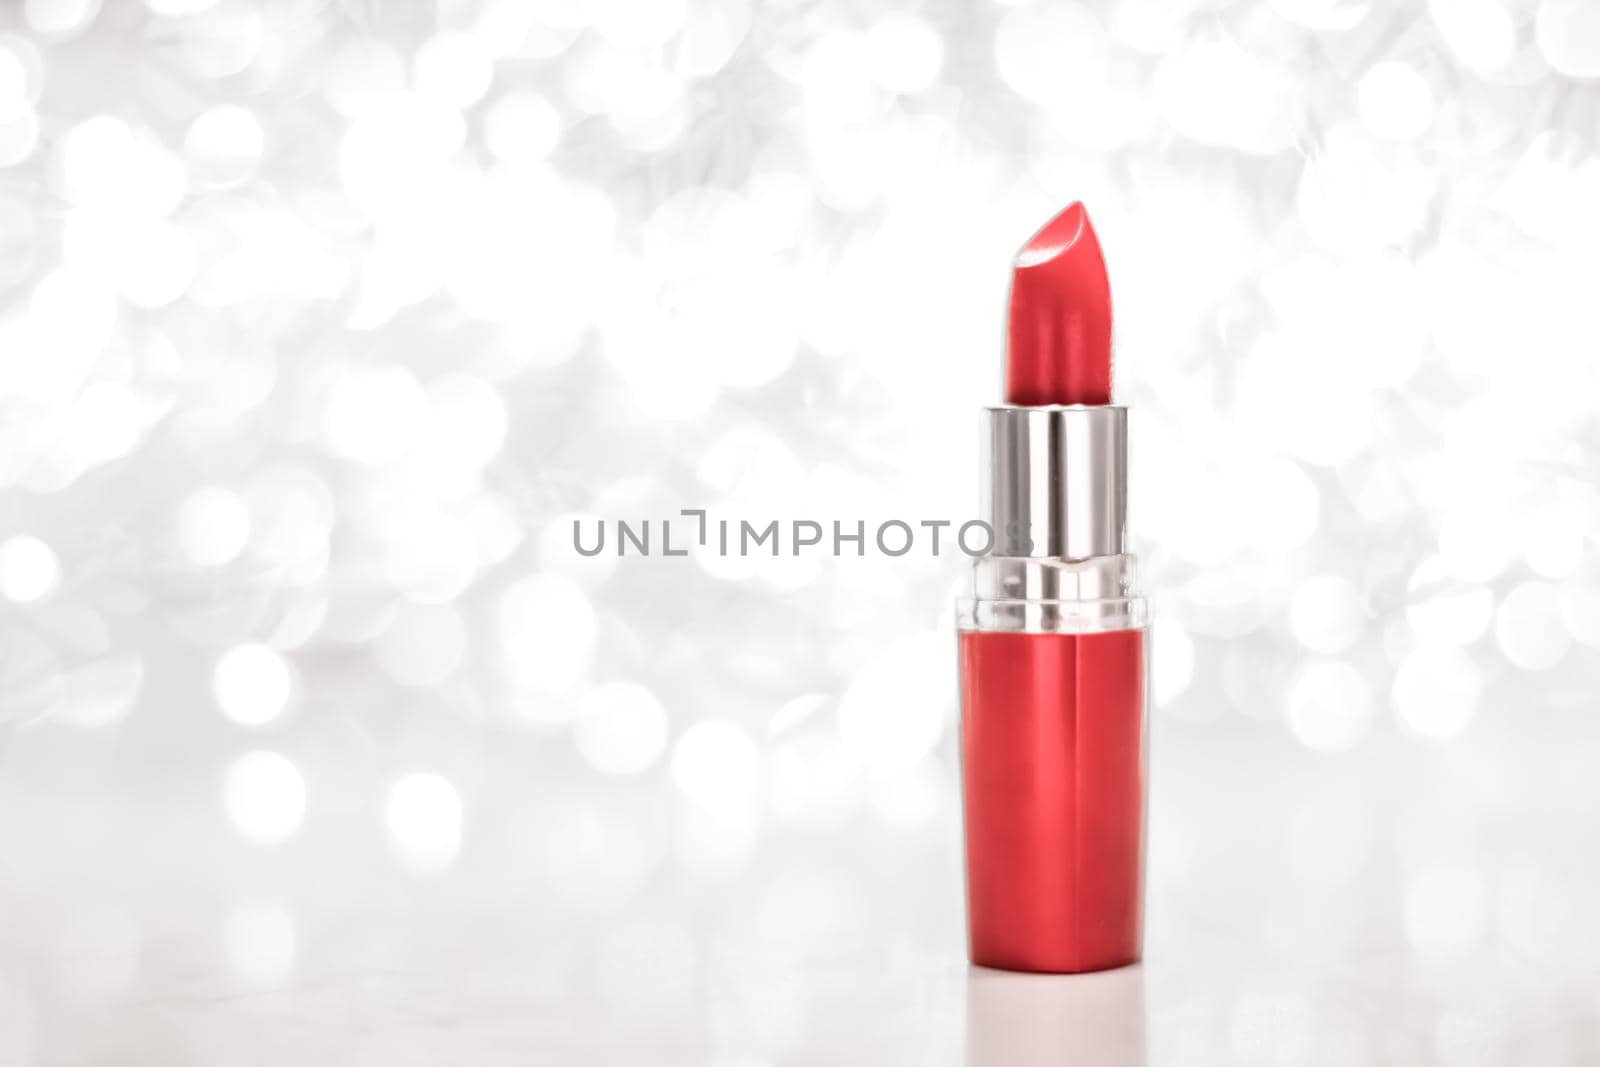 Cosmetic branding, sale and glamour concept - Coral lipstick on silver Christmas, New Years and Valentines Day holiday glitter background, make-up and cosmetics product for luxury beauty brand